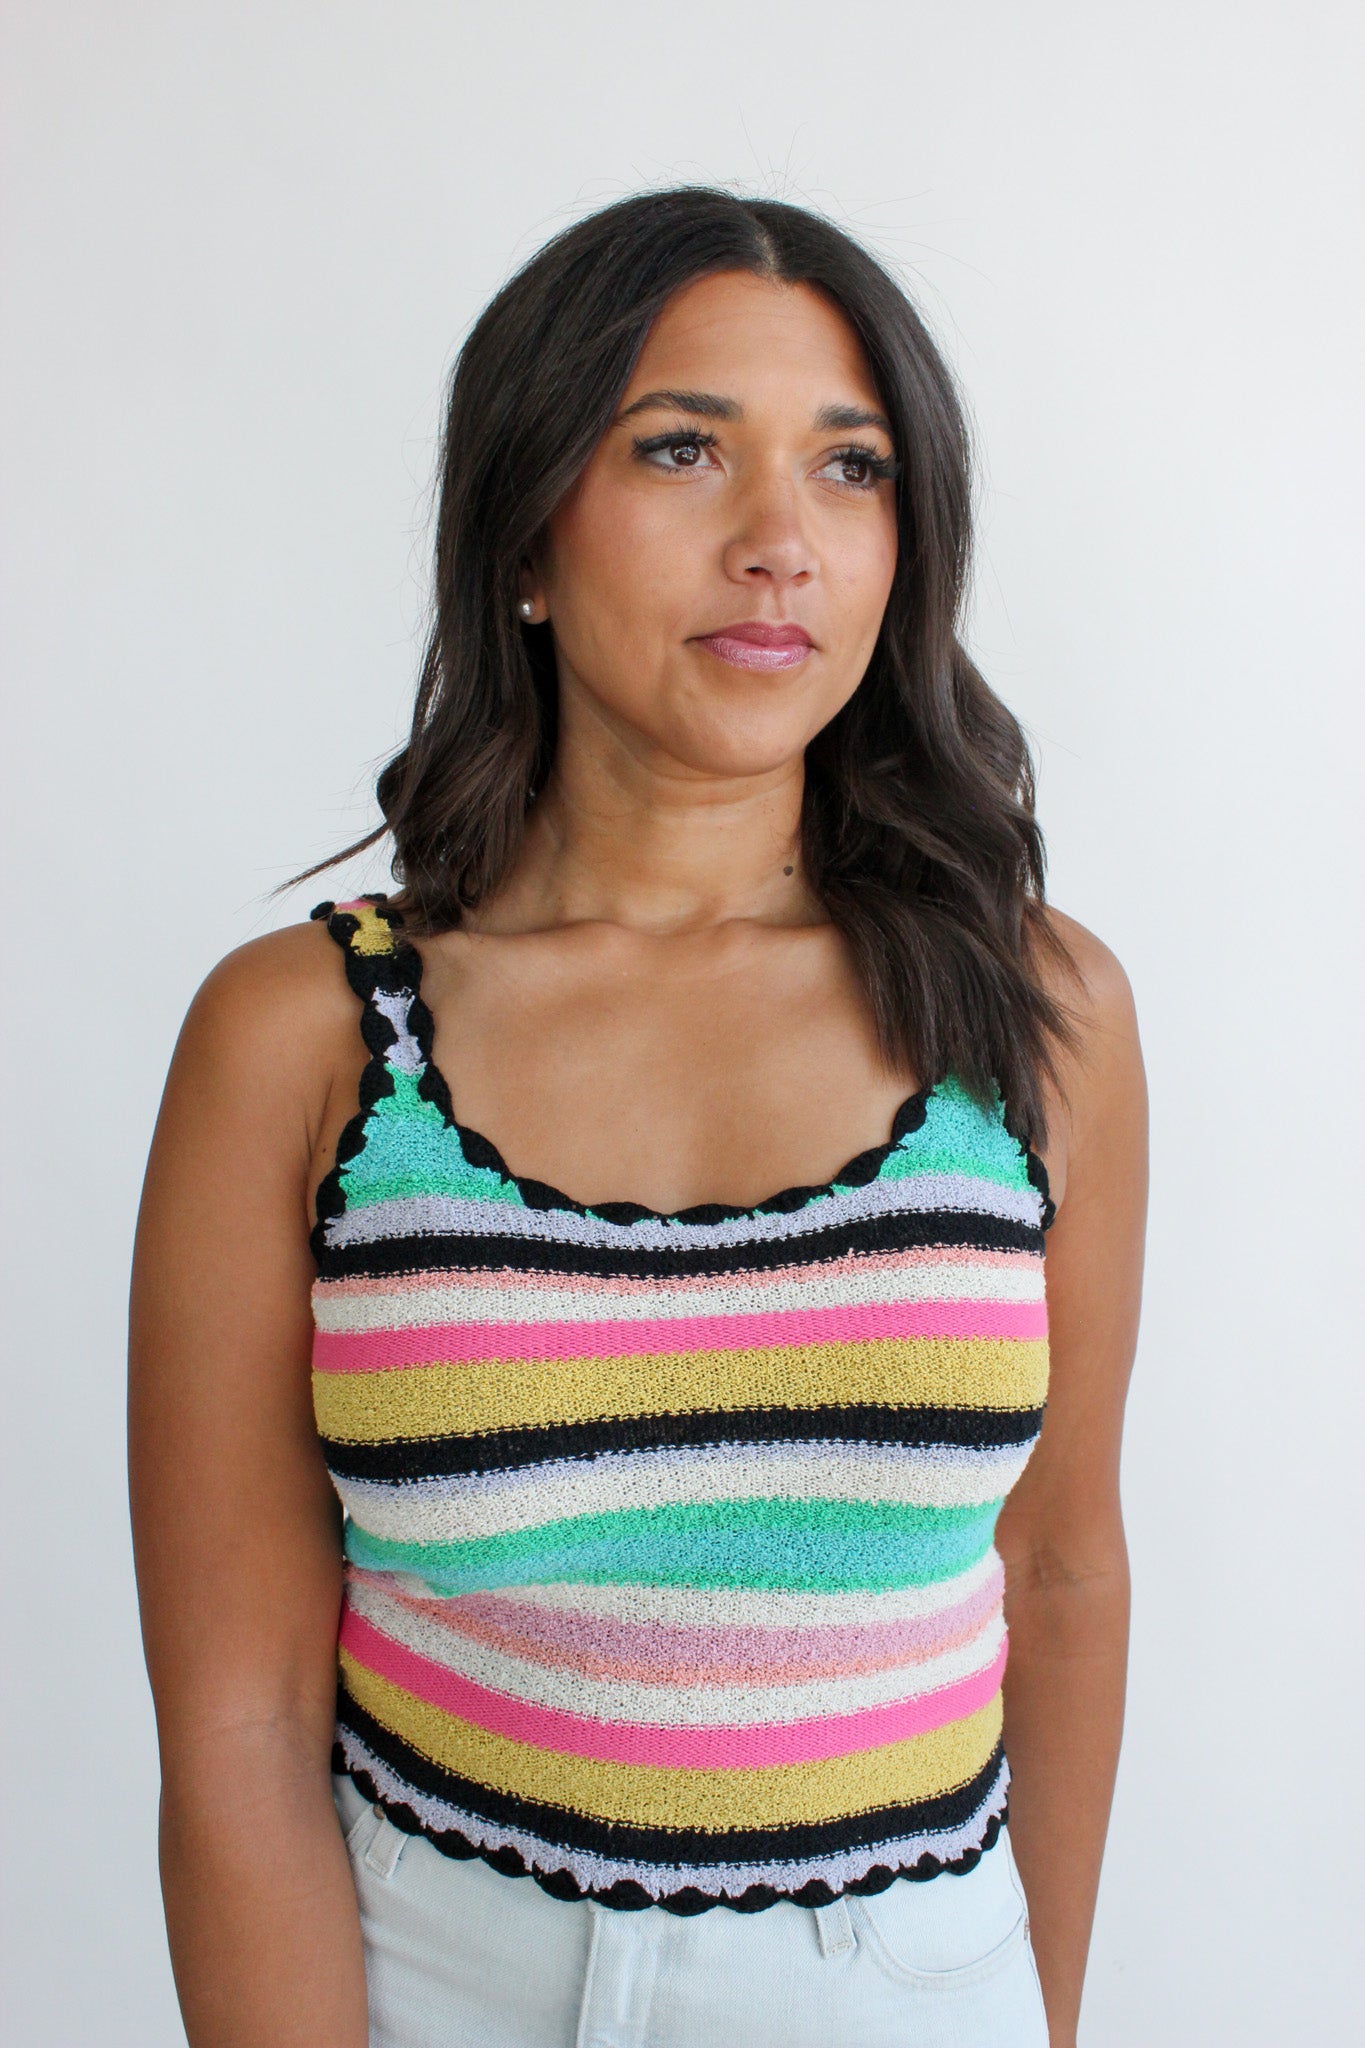 Nelly Sweater Tank